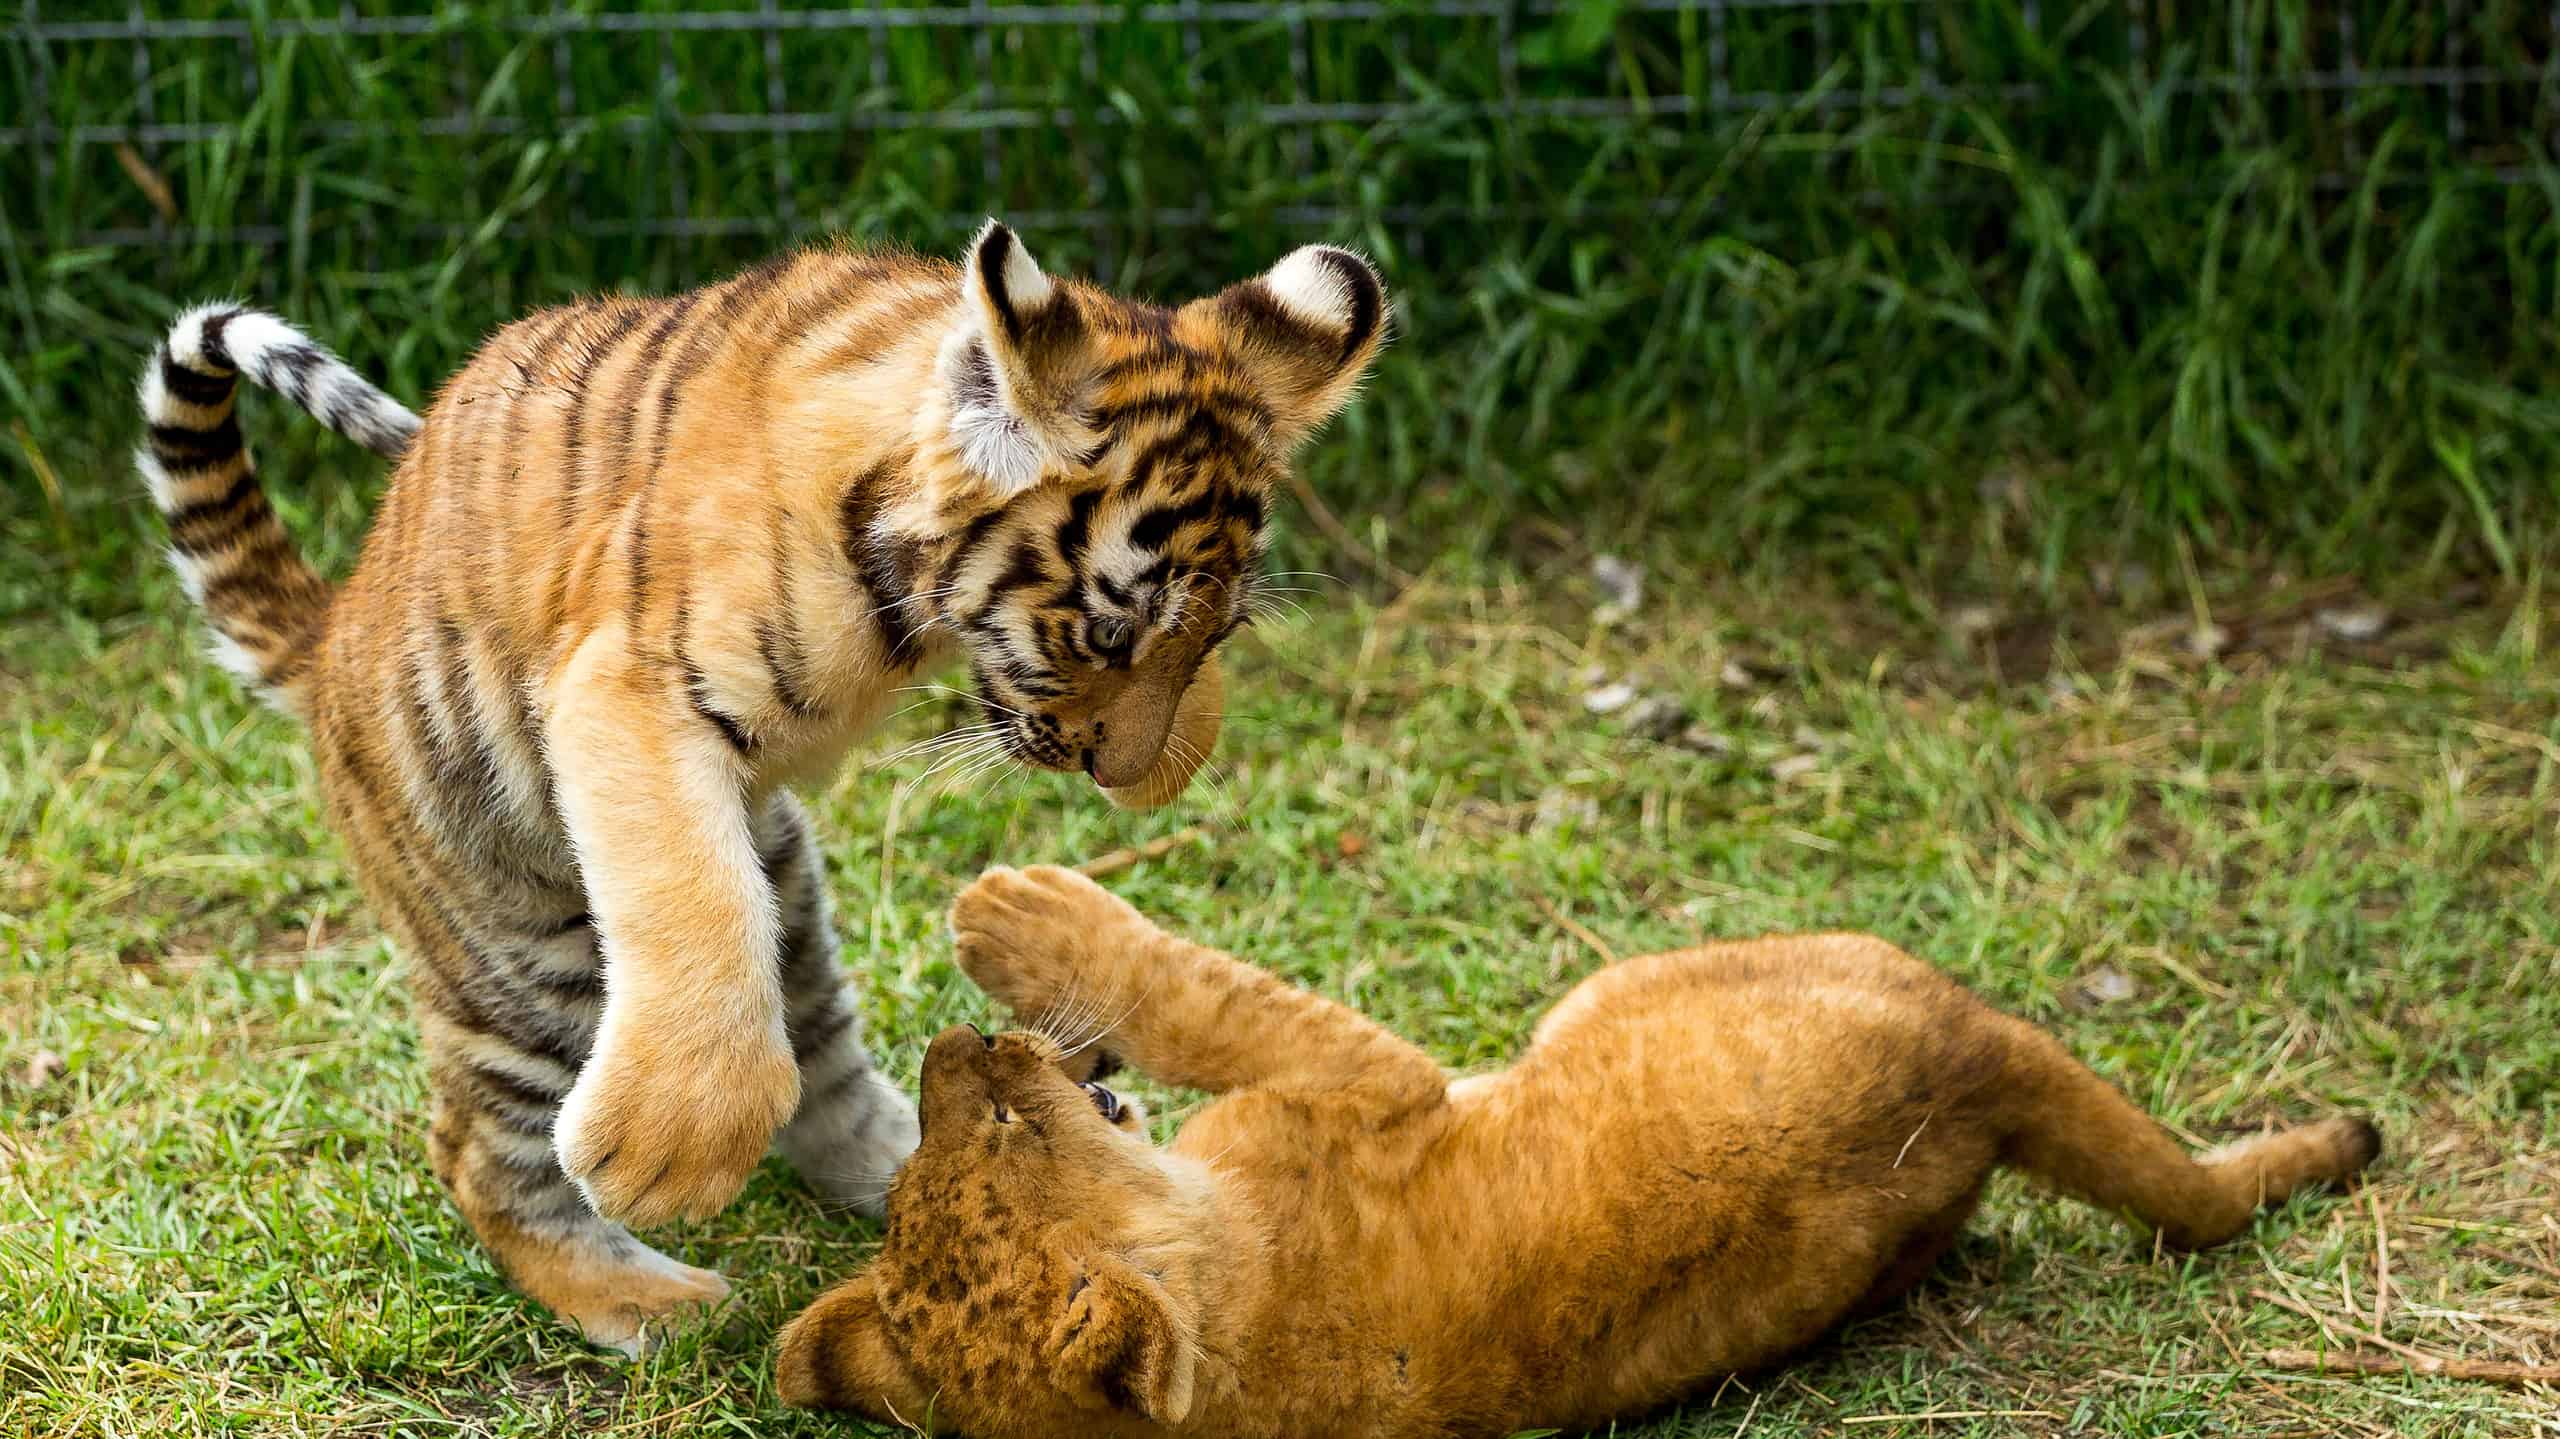 Lions vs Tigers - 5 Key Differences (And Who Would Win in a Fight) - AZ  Animals